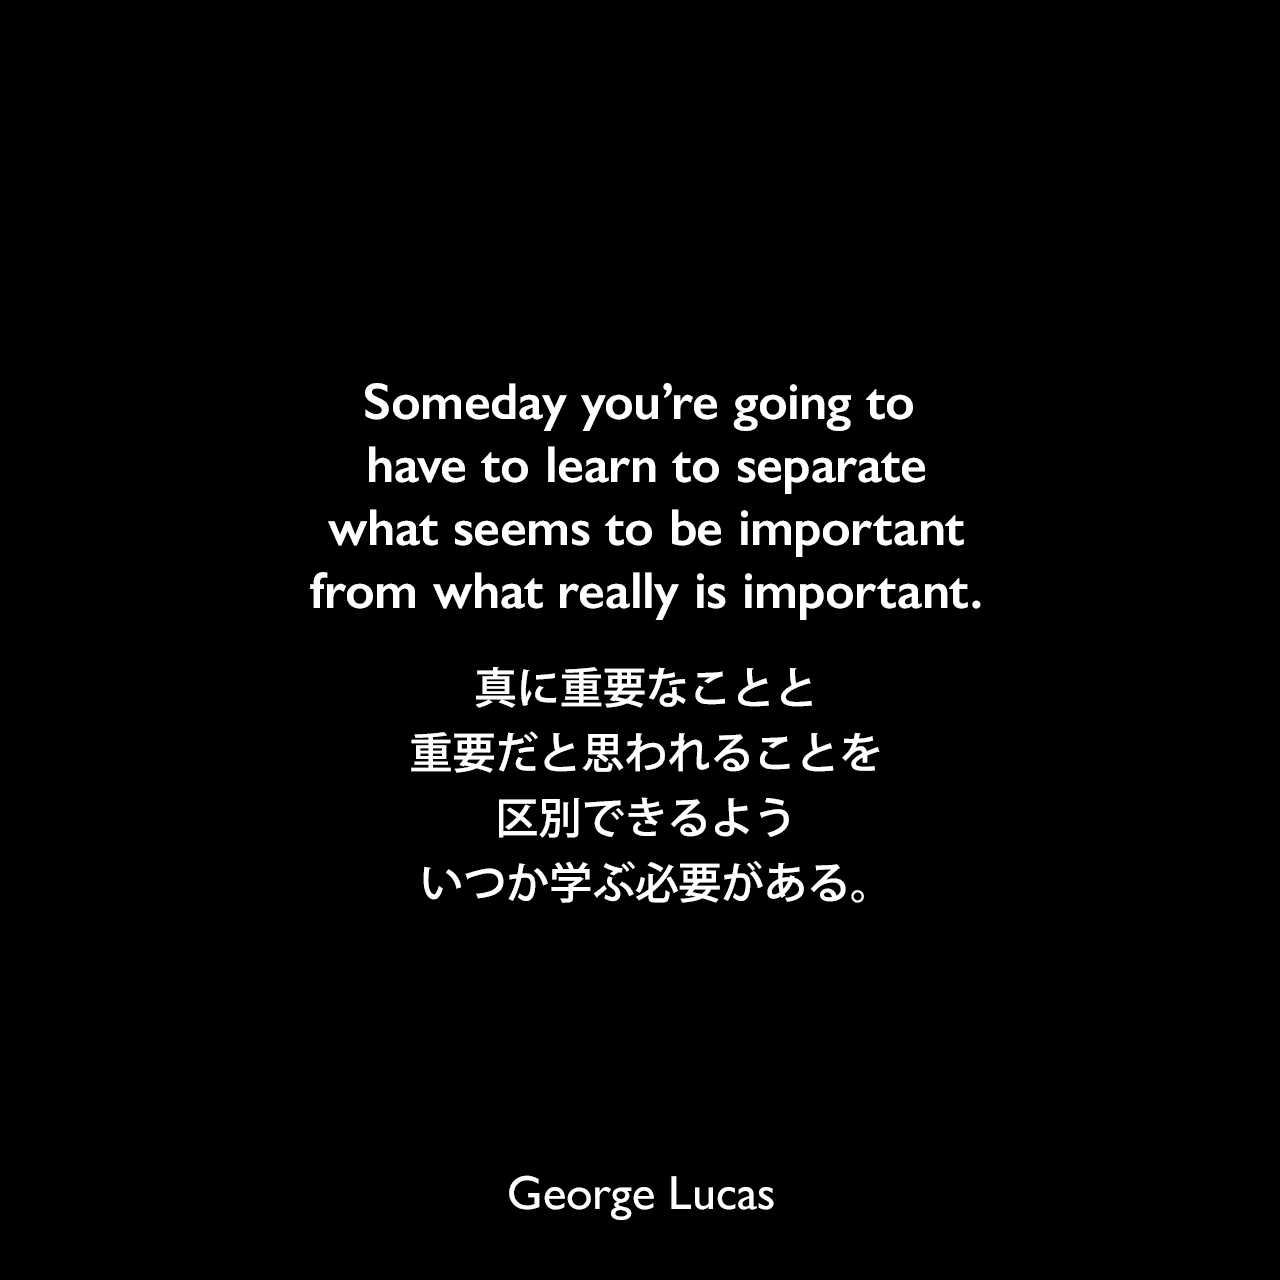 Someday you’re going to have to learn to separate what seems to be important from what really is important.真に重要なことと重要だと思われることを区別できるよう、いつか学ぶ必要がある。George Lucas